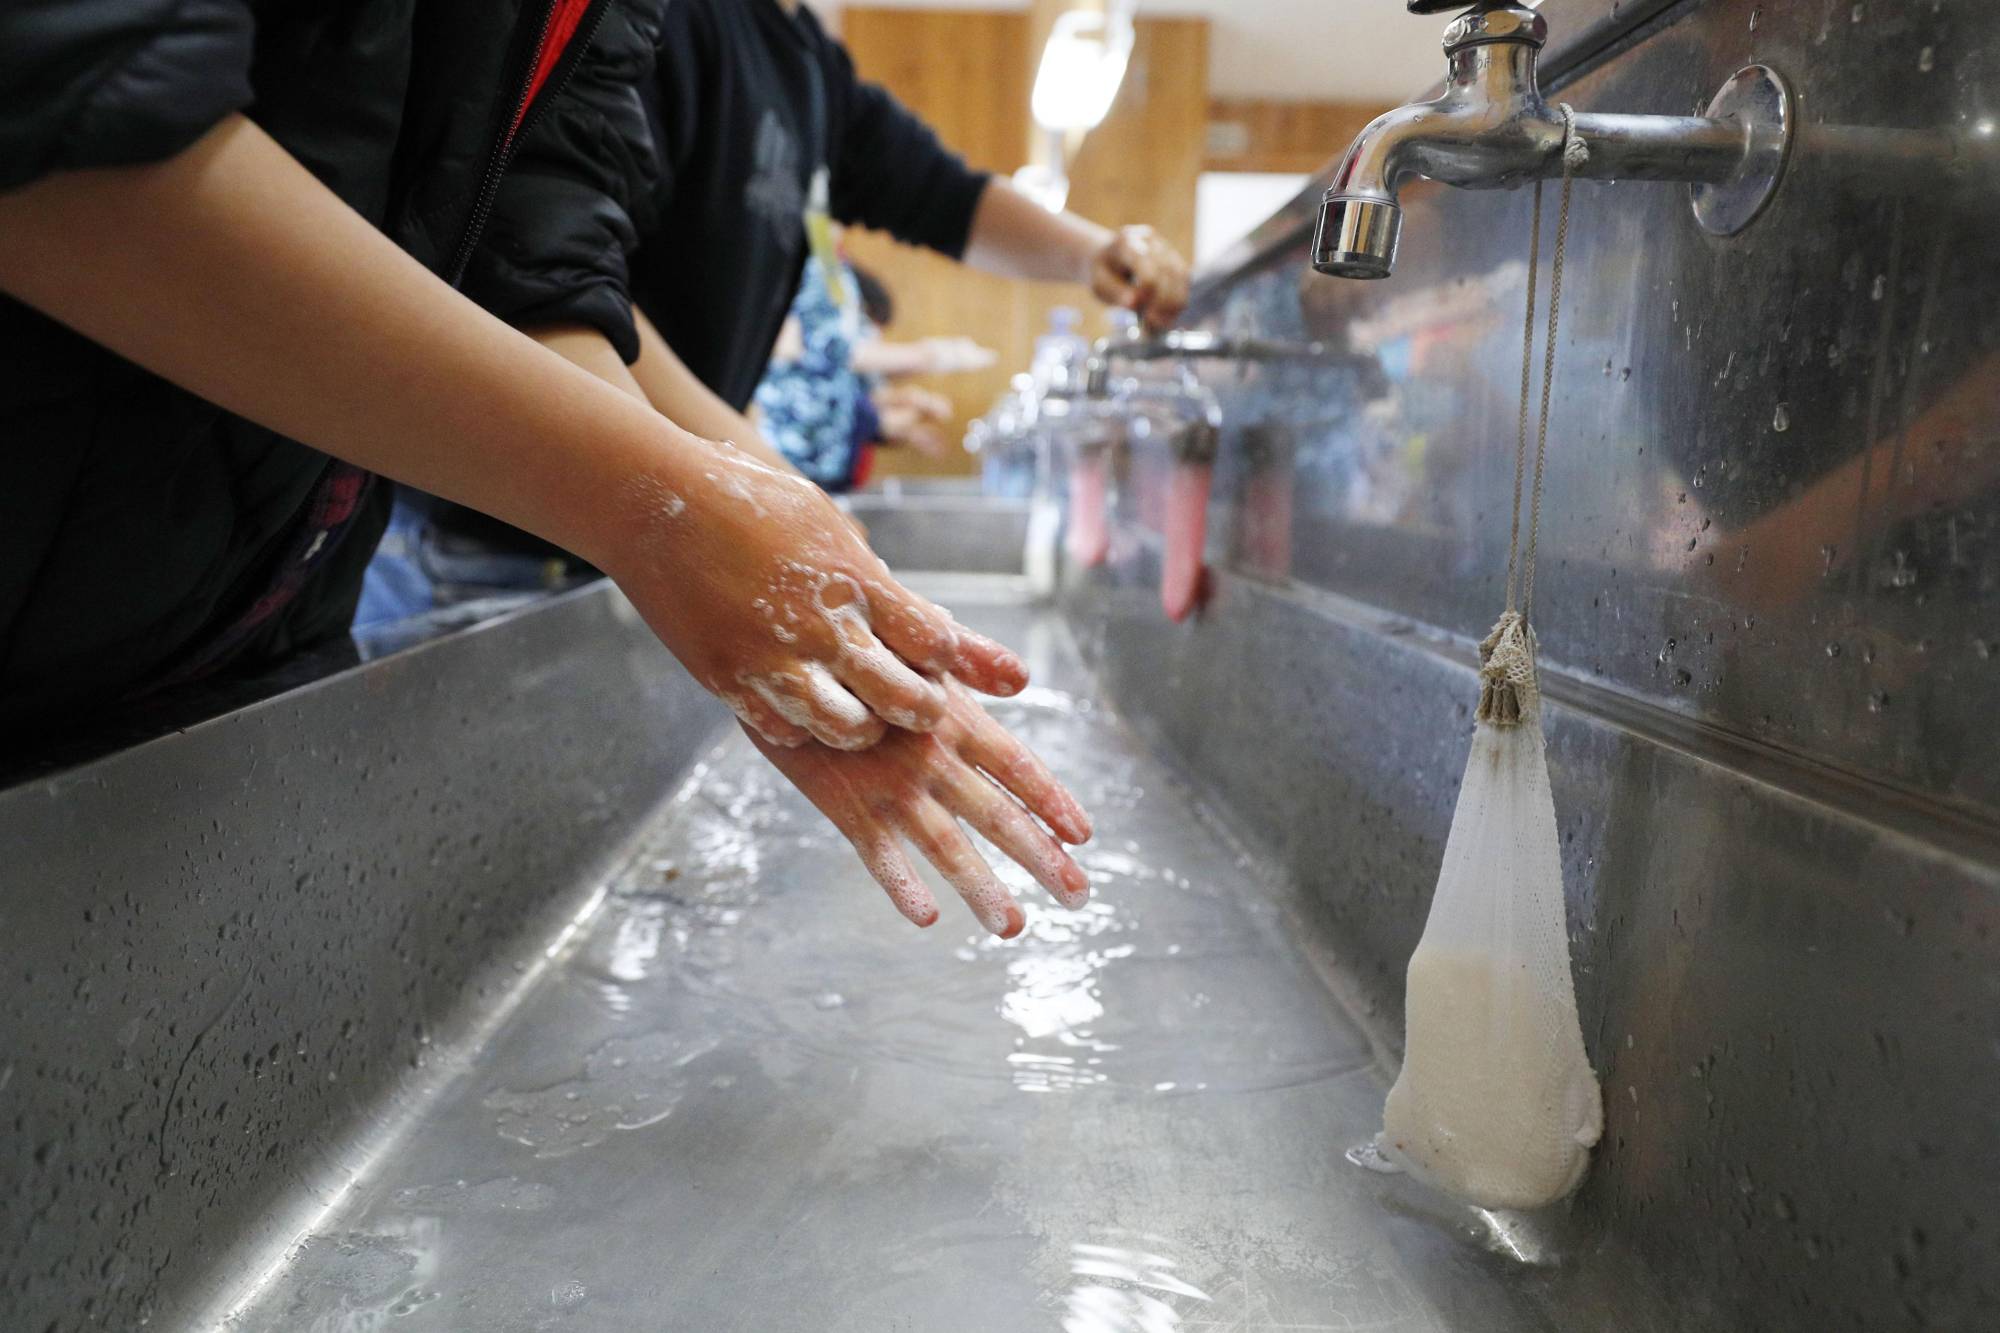 Students wash their hands at their elementary school in Shizuoka on March 16, 2020, amid the early spread of the novel coronavirus in Japan. | KYODO